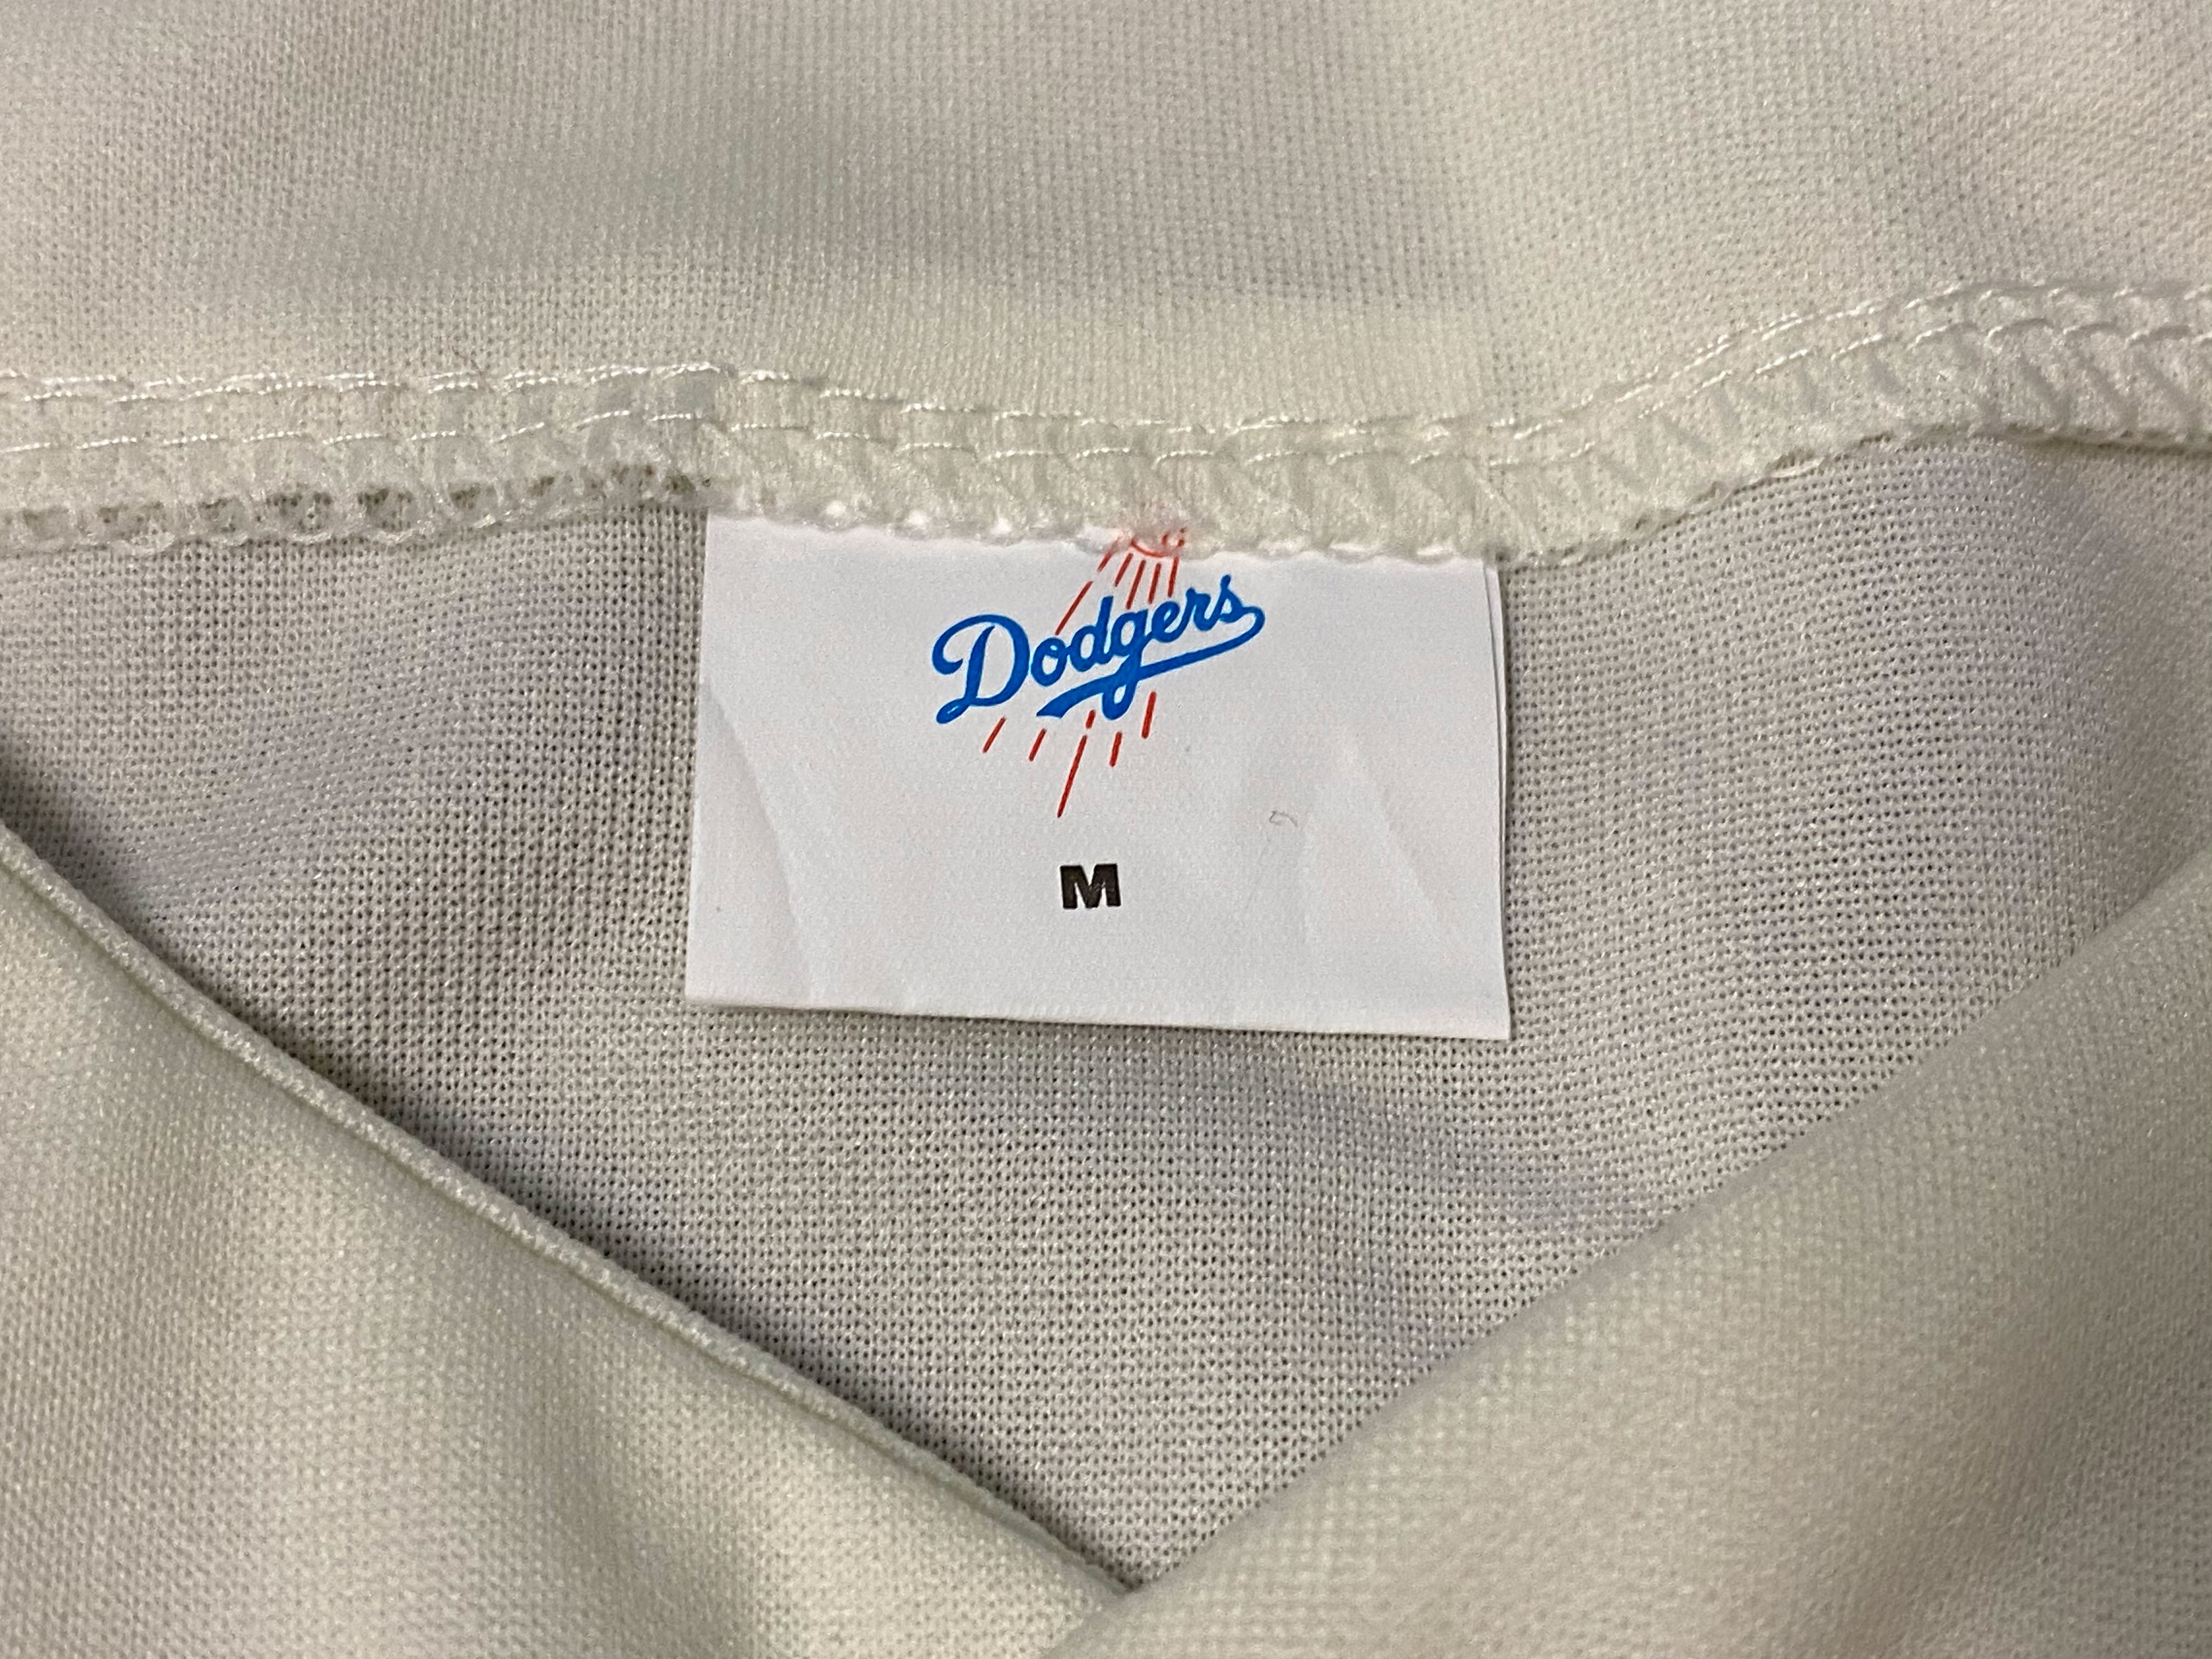 Dodgers Jackie Robinson 1955 Jersey - White